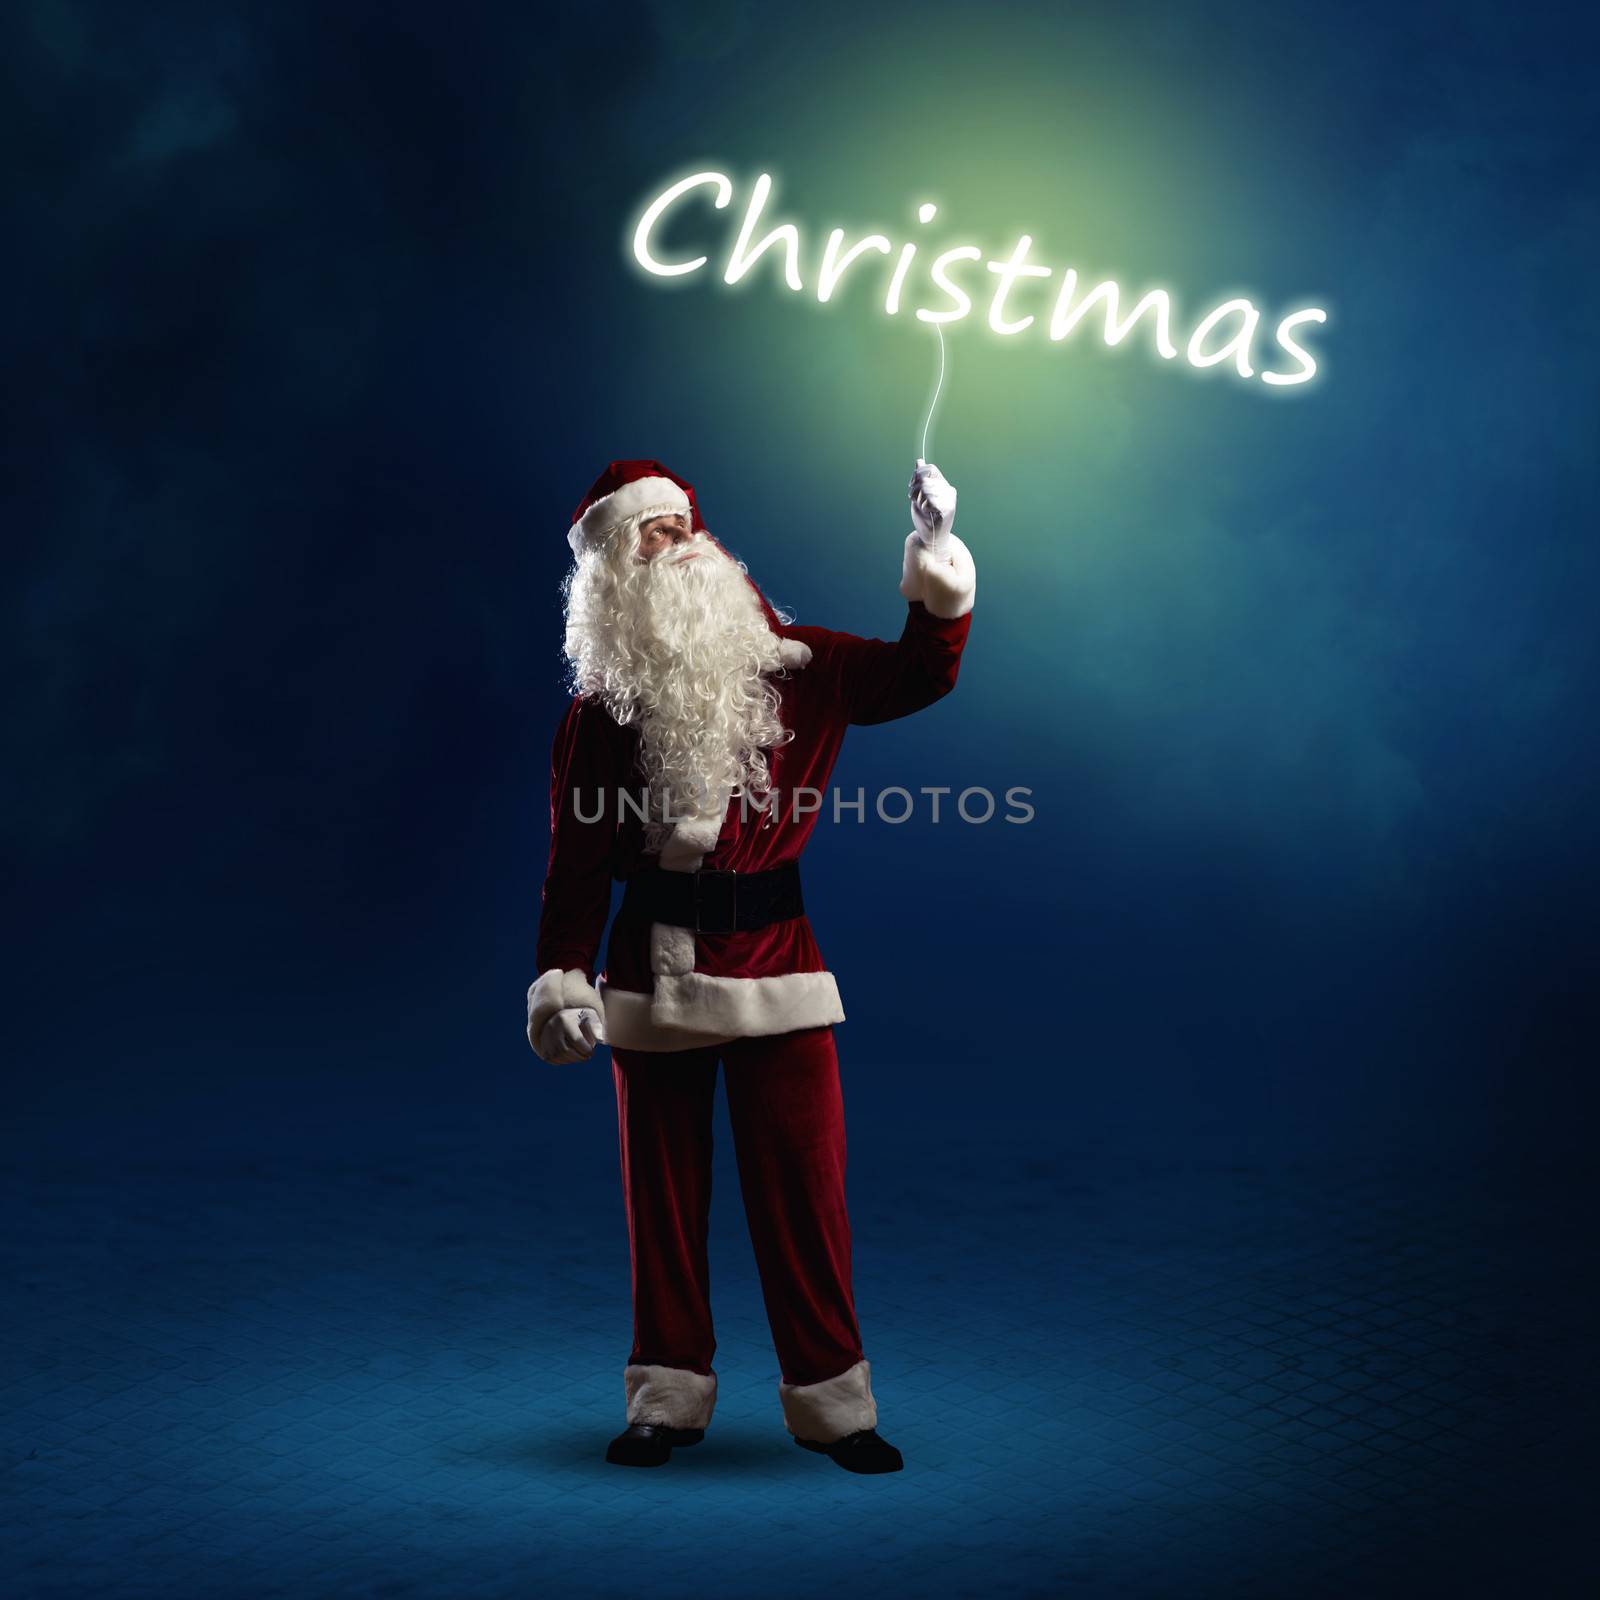 Santa Claus is holding a shining Christmas word sign on a string